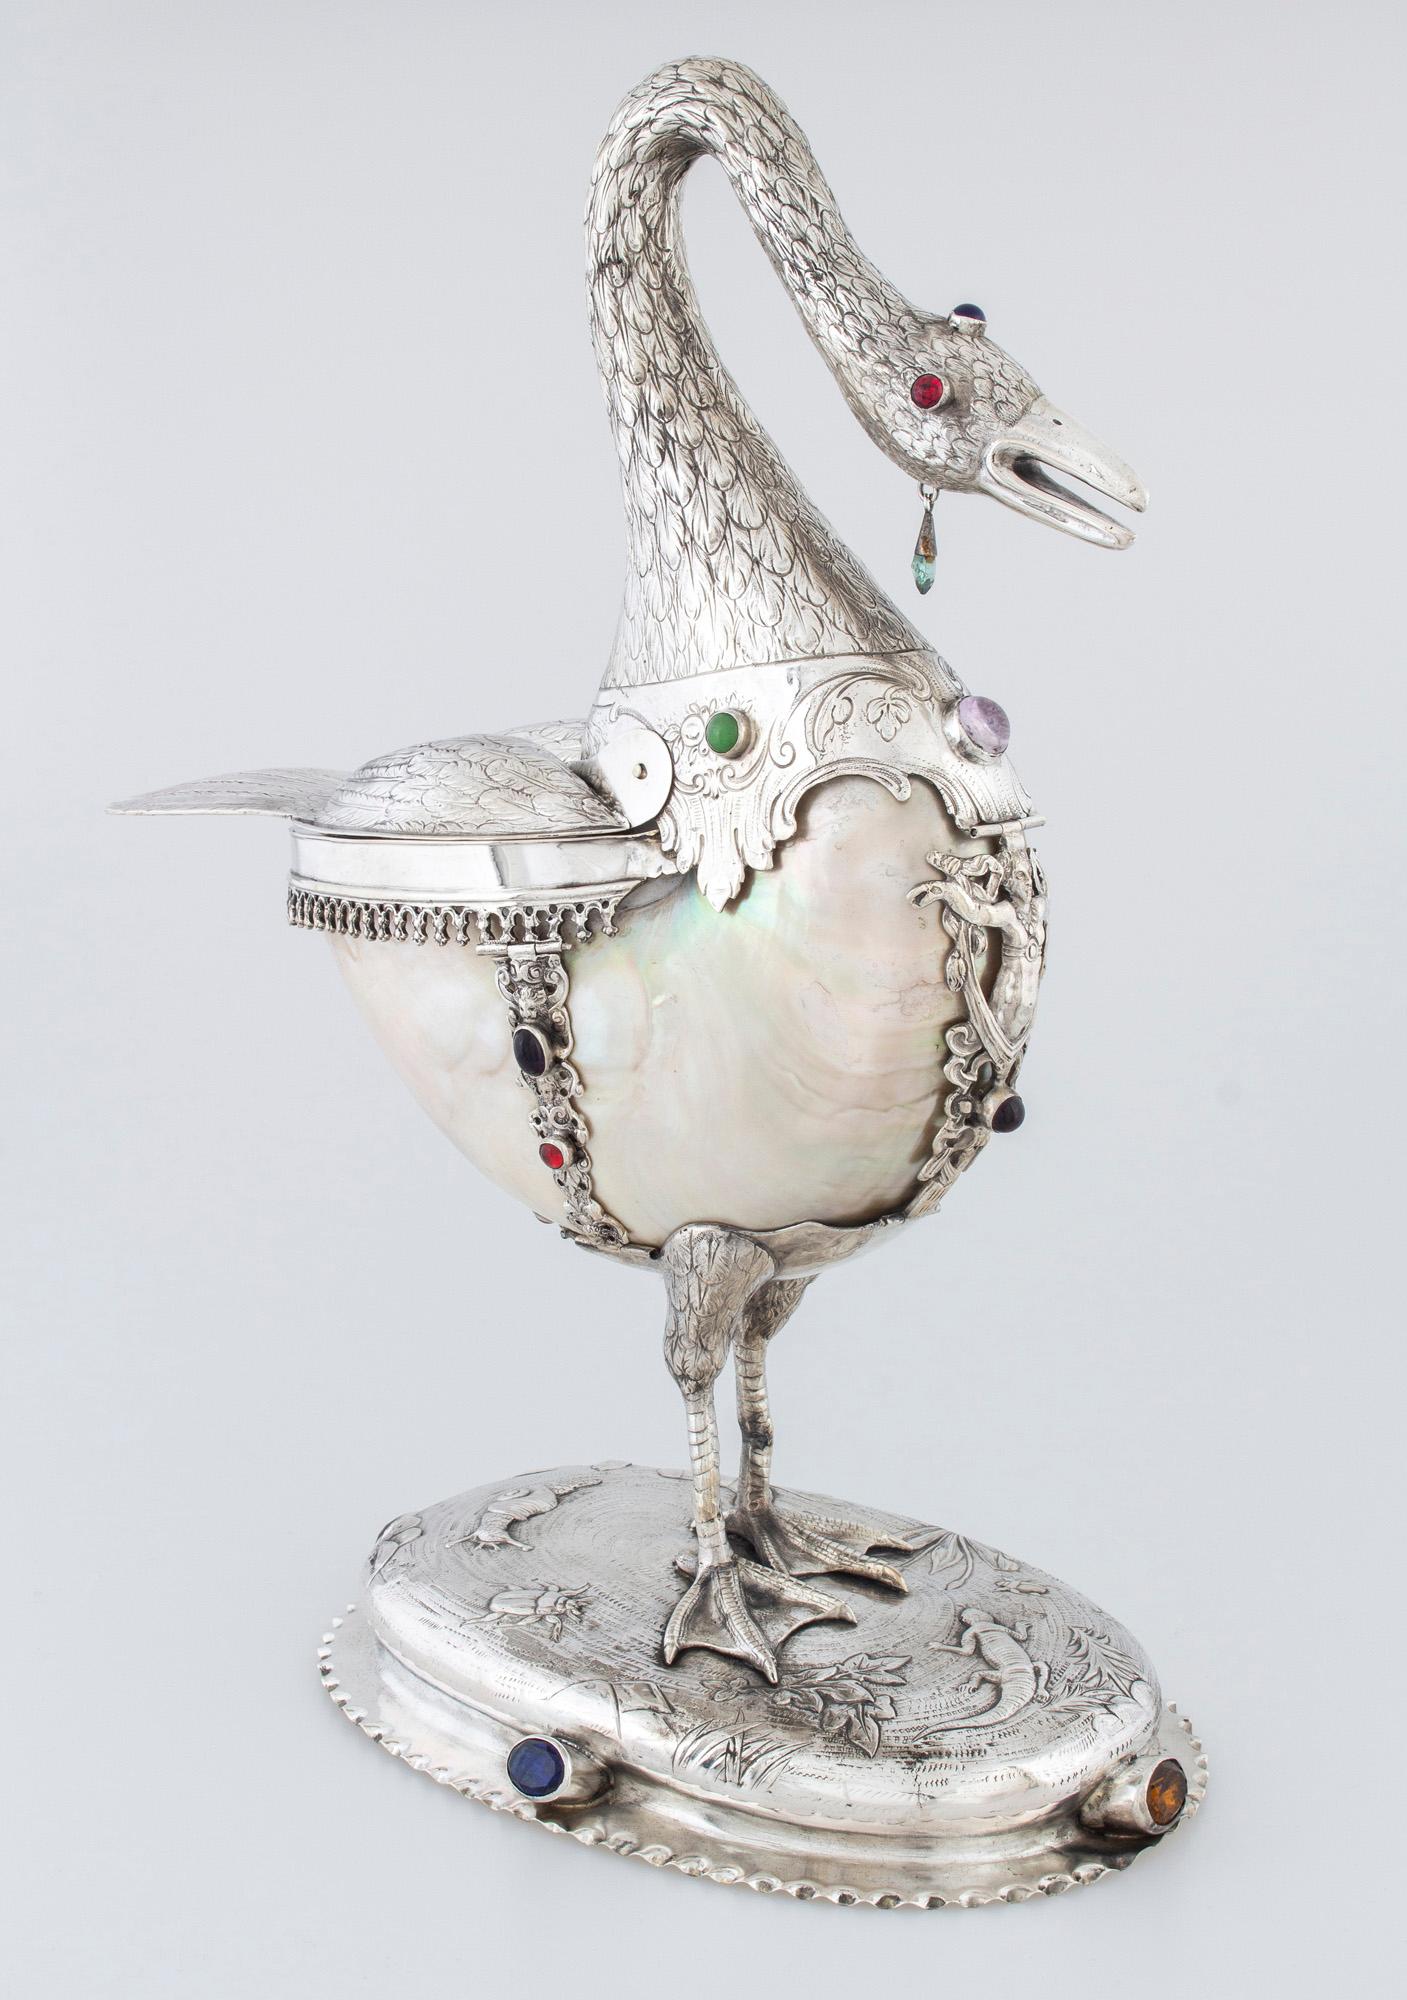 Silver centerpiece. Gross weight: 1135 g. 
Swan-shaped silver-encased shell (nautilus). 
With a wavy rim, an oval base depicting a naturalistically crafted waterside scene. 
On it, there are embossed and engraved decorations. 
On the sides of the